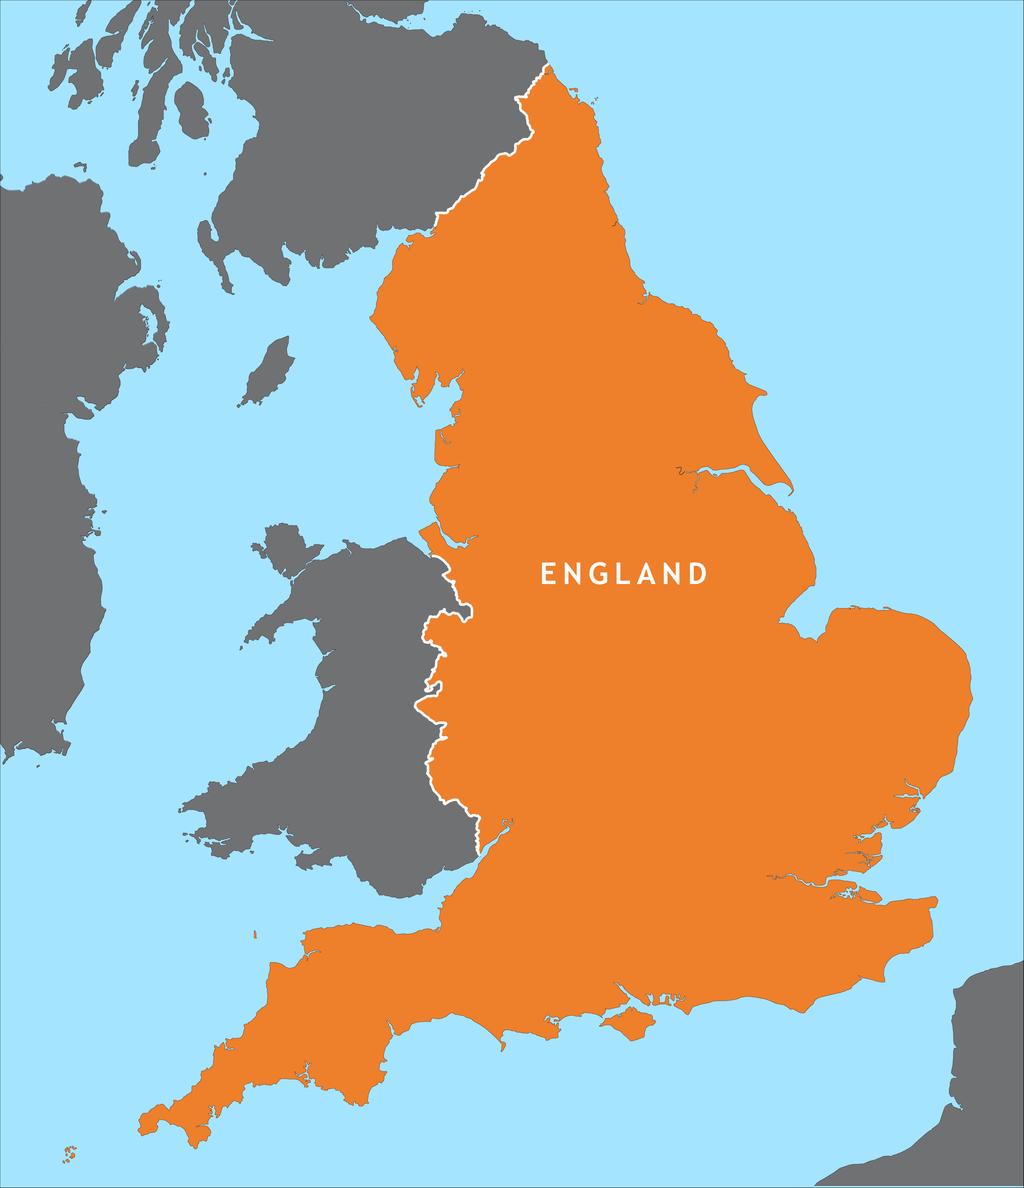 Britain is a